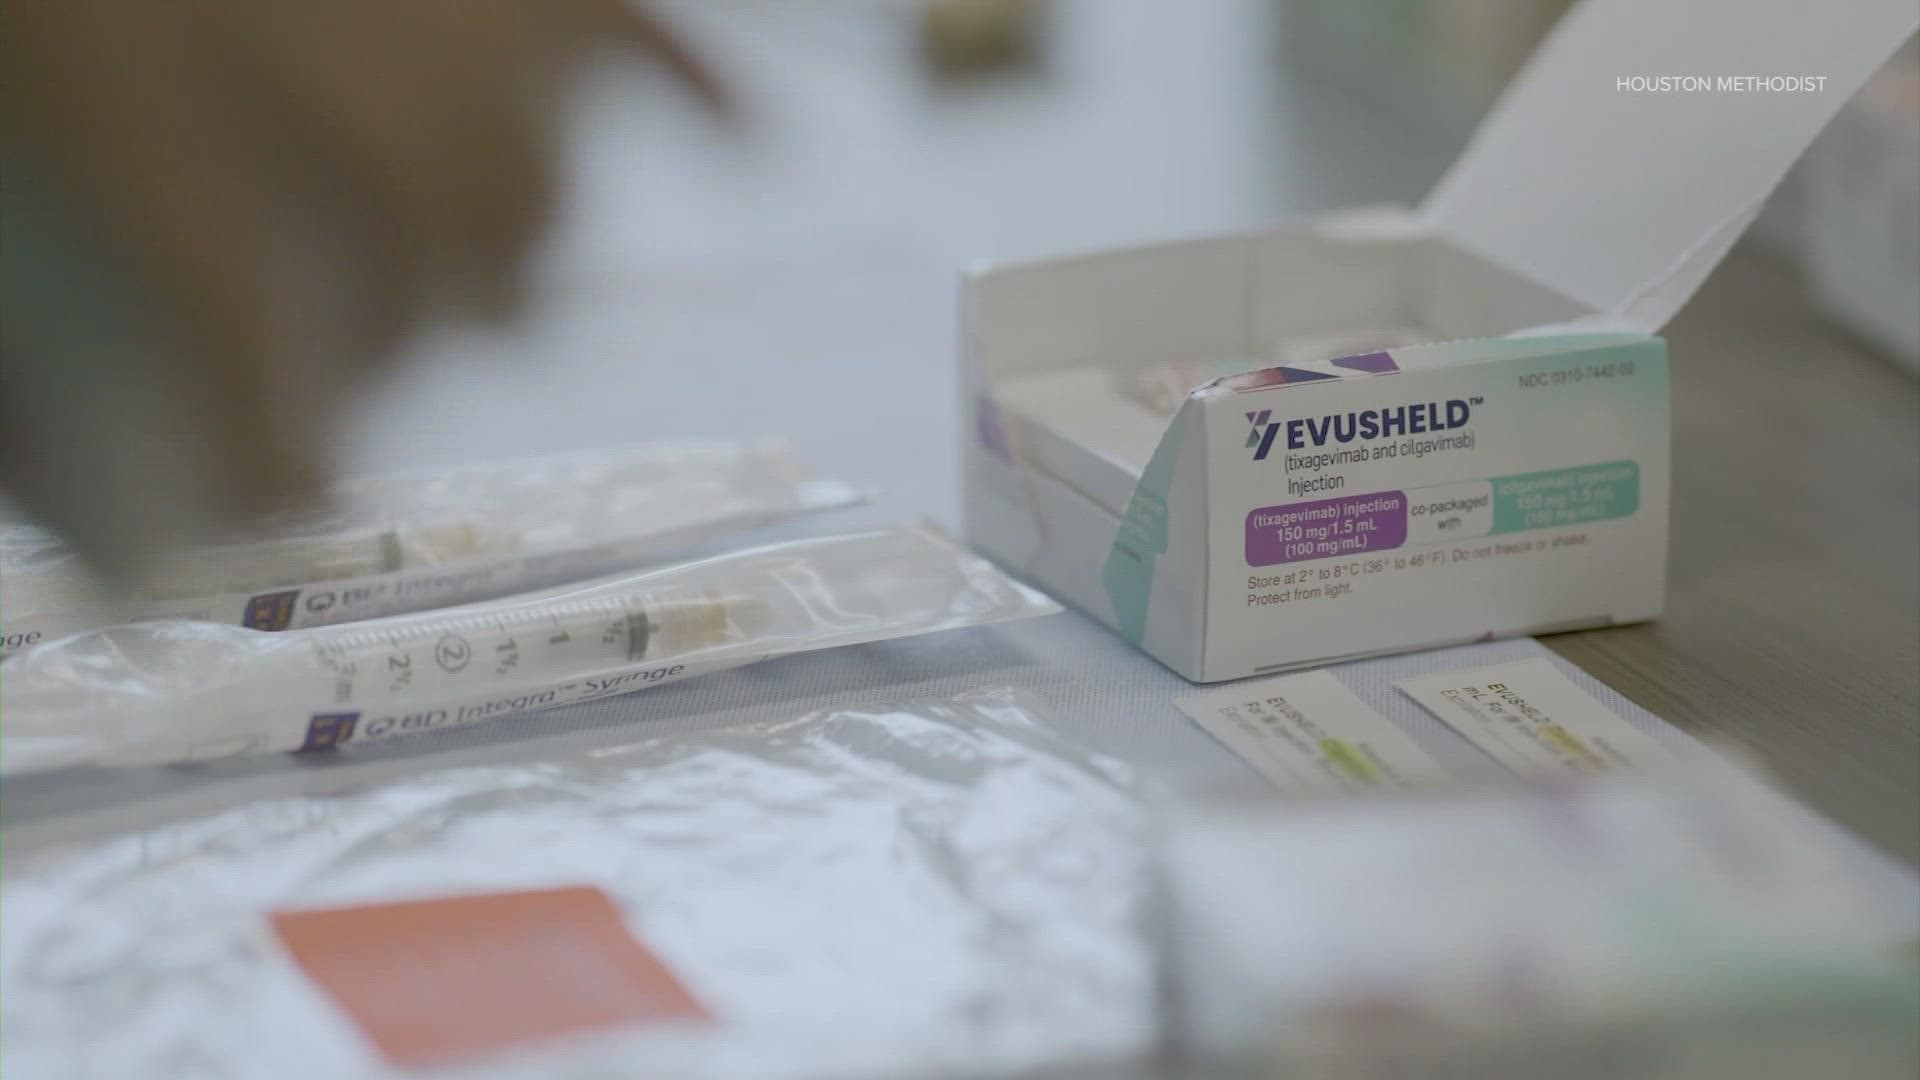 Evusheld is a preventative shot that involves two doses, specifically intended for vulnerable people, including those battling cancer or organ transplant patients.